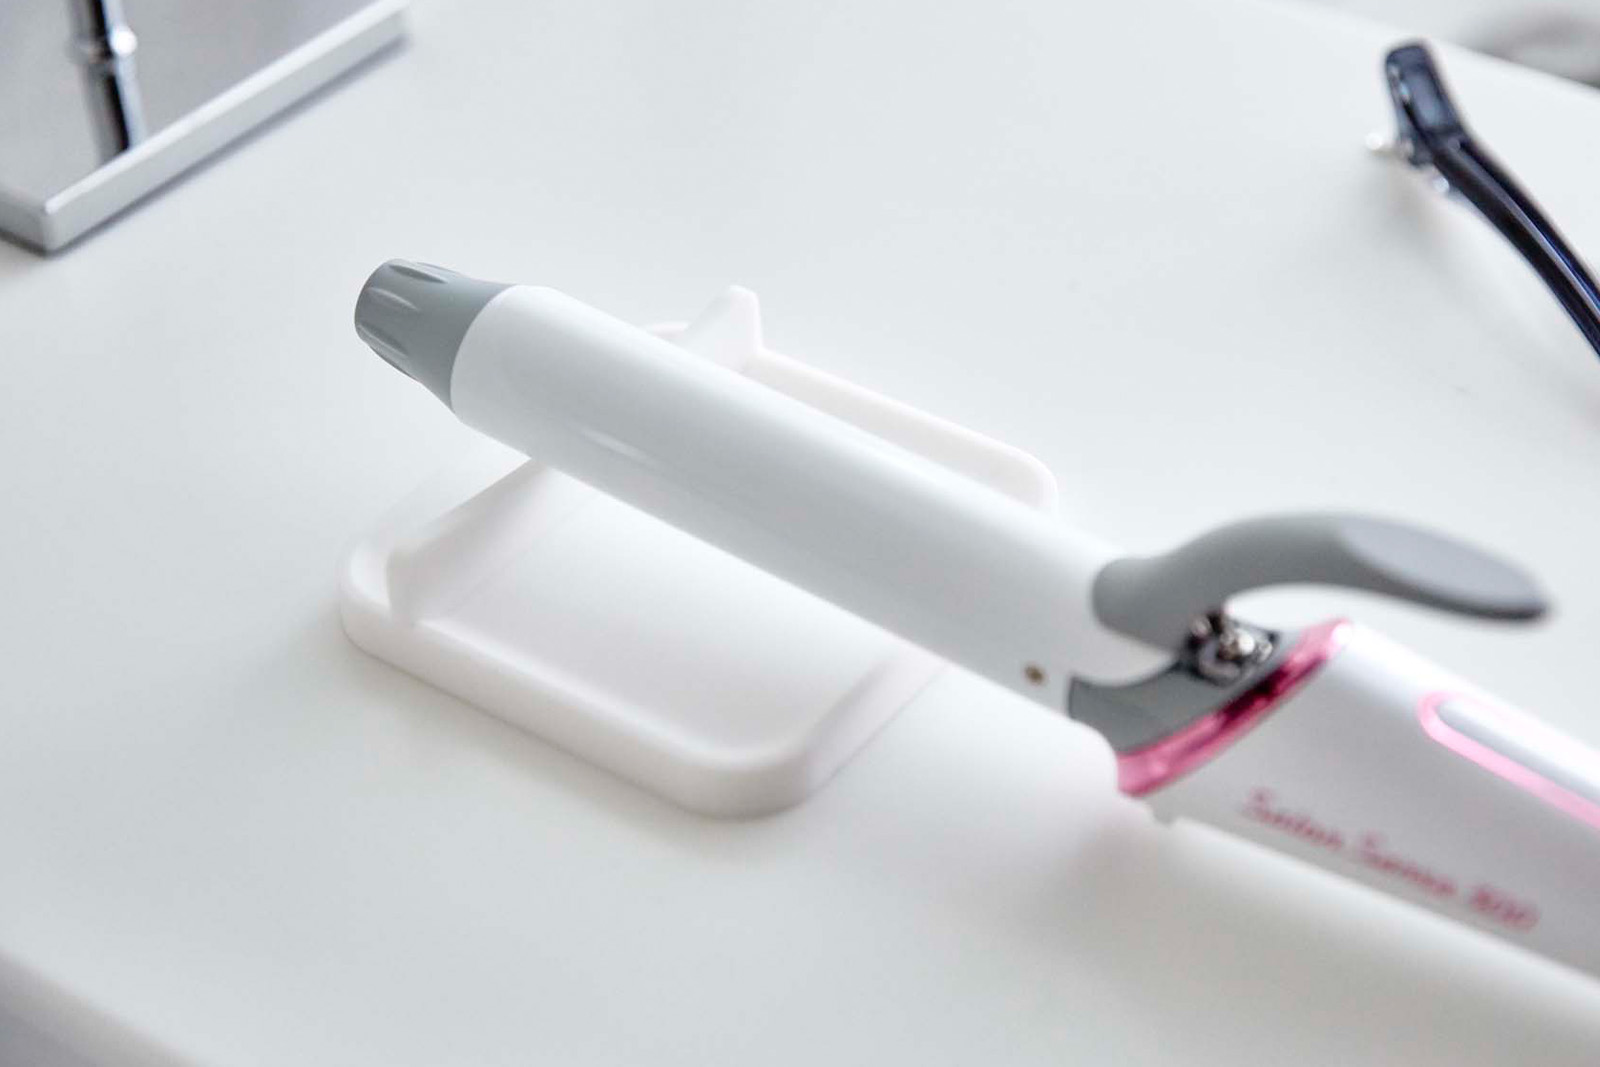 Haircare Appliance Rest holding curling wand by Yamazaki Home.